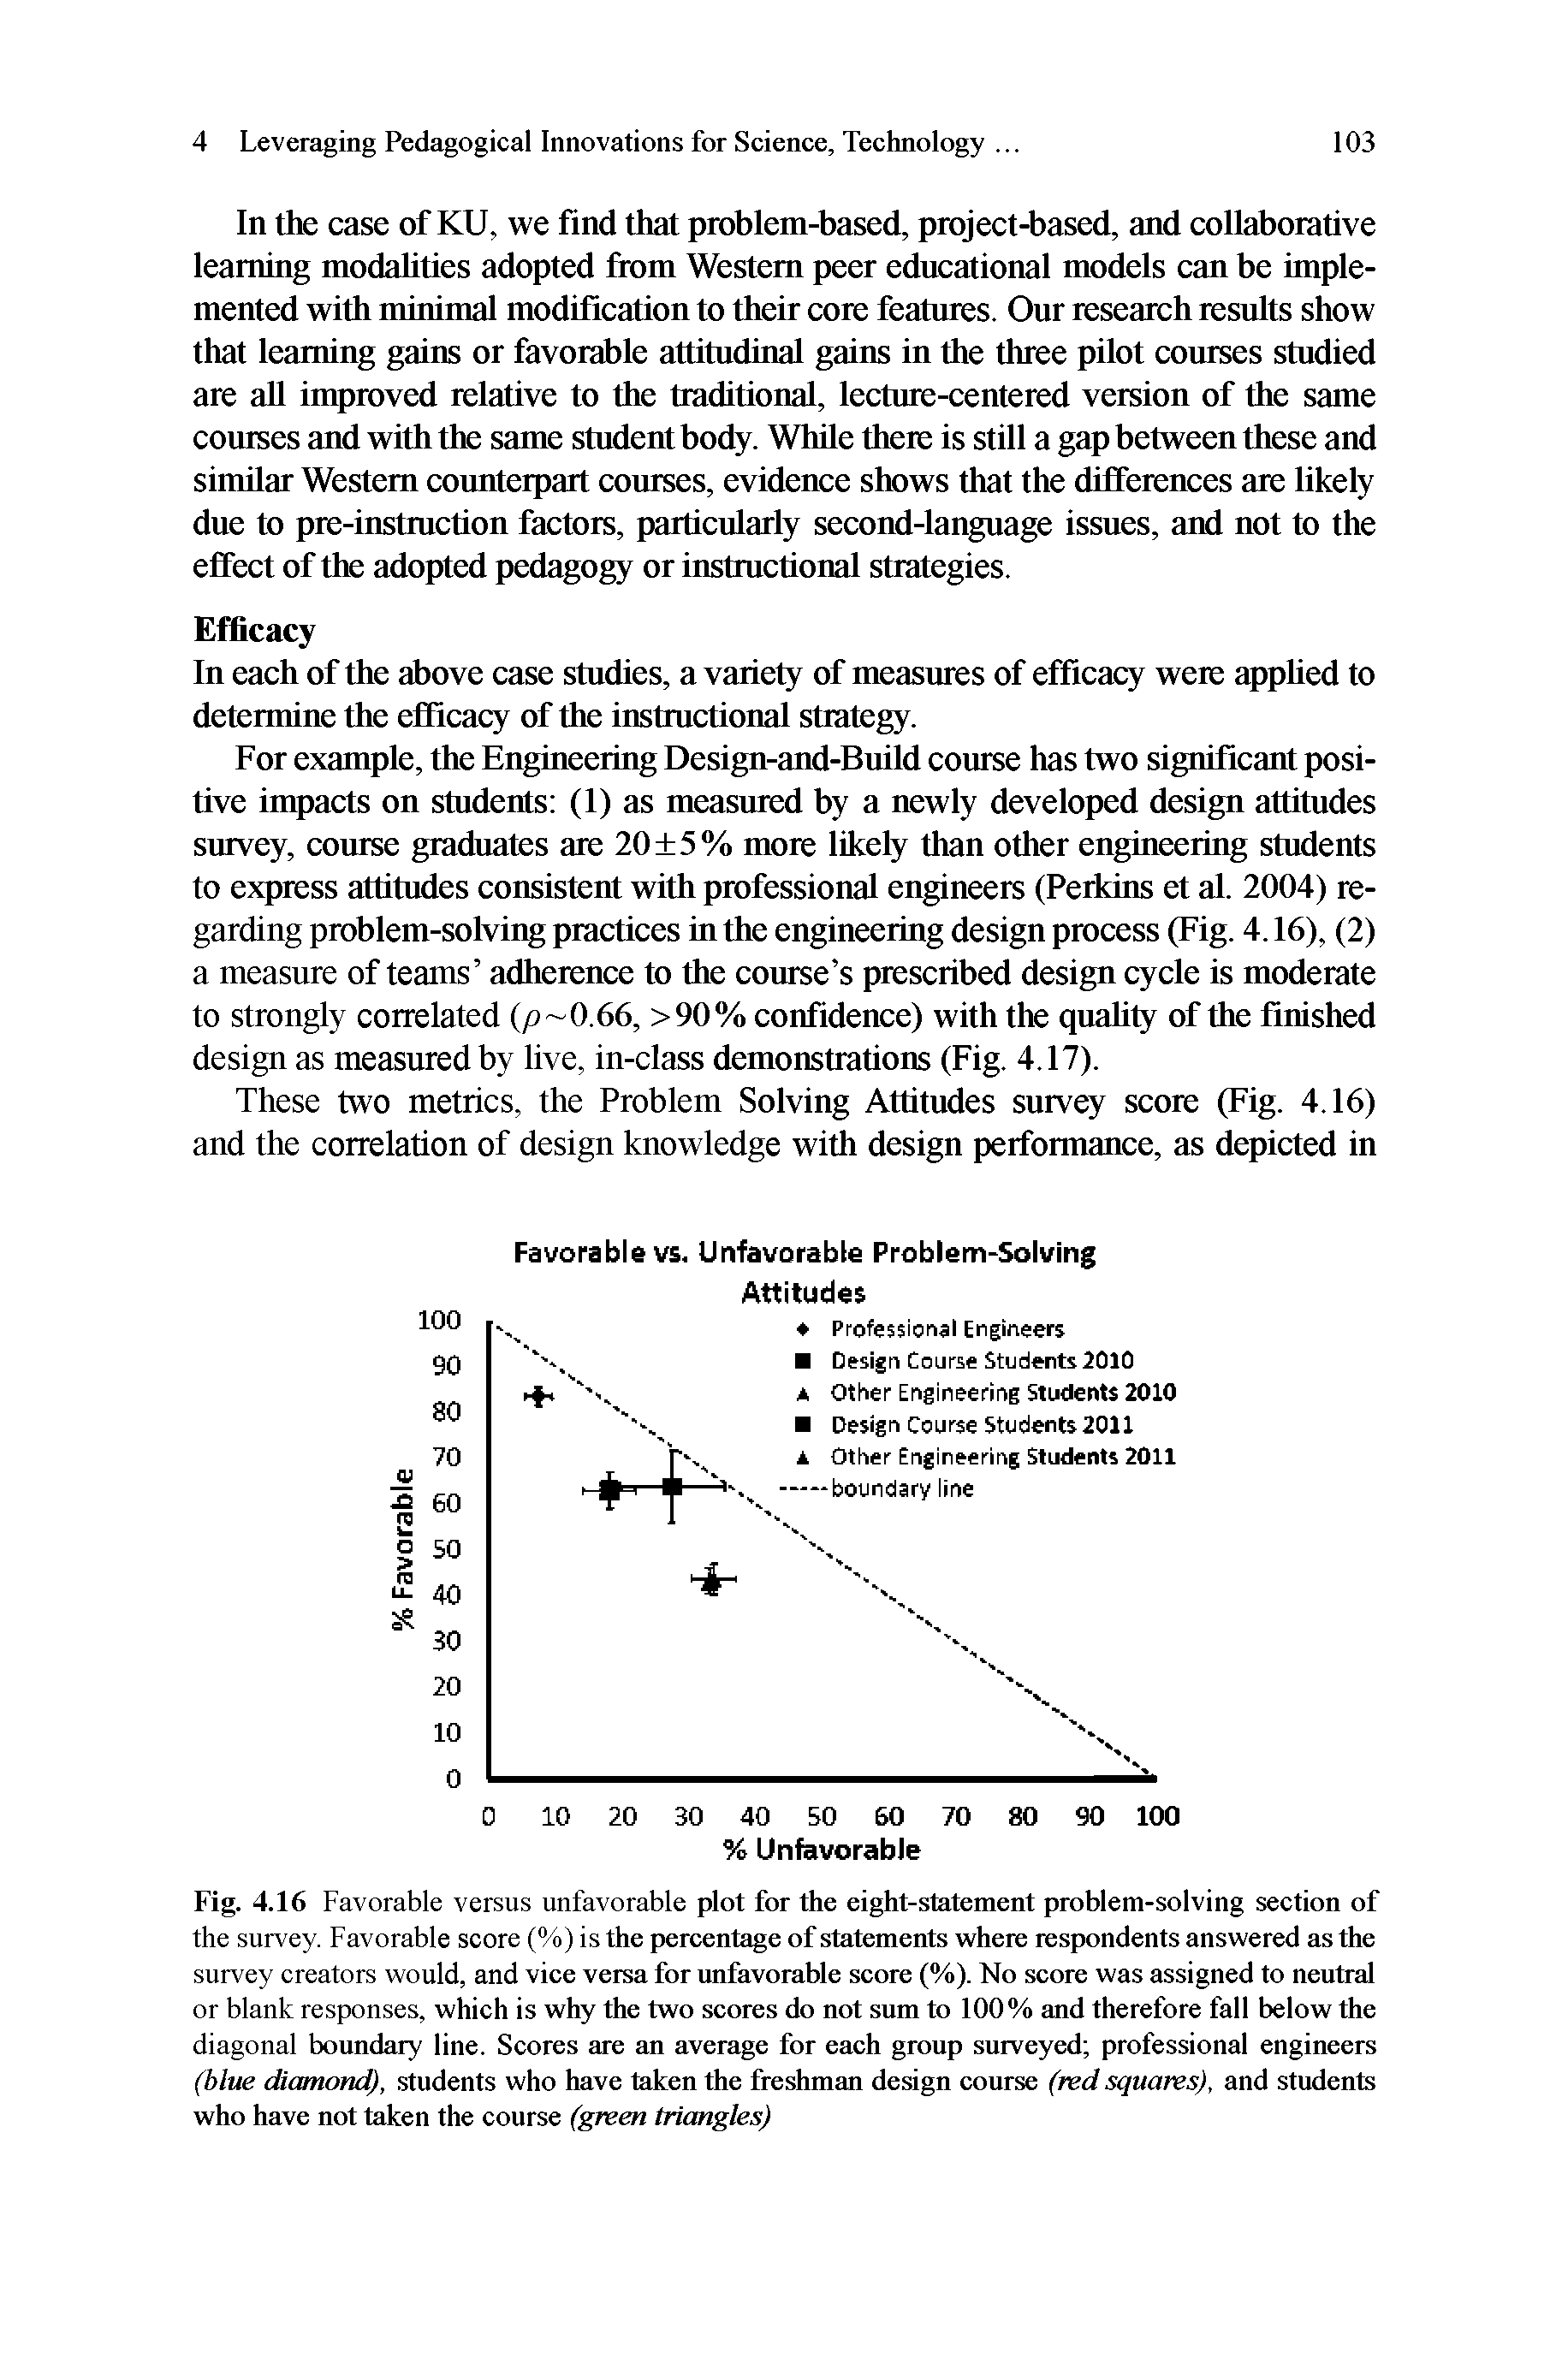 Fig. 4.16 Favorable versus unfavorable plot for the eight-statement problem-solving section of the survey. Favorable score (%) is the percentage of statements where respondents answered as the survey creators would, and vice versa for unfavorable score (%). No score was assigned to neutral or blank responses, which is why the two scores do not sum to 100% and therefore fall below the diagonal boundary line. Scores are an average for each group surveyed professional engineers (blue diamond), students who have taken the freshman design course (red squares), and students who have not taken the course (green triangles)...